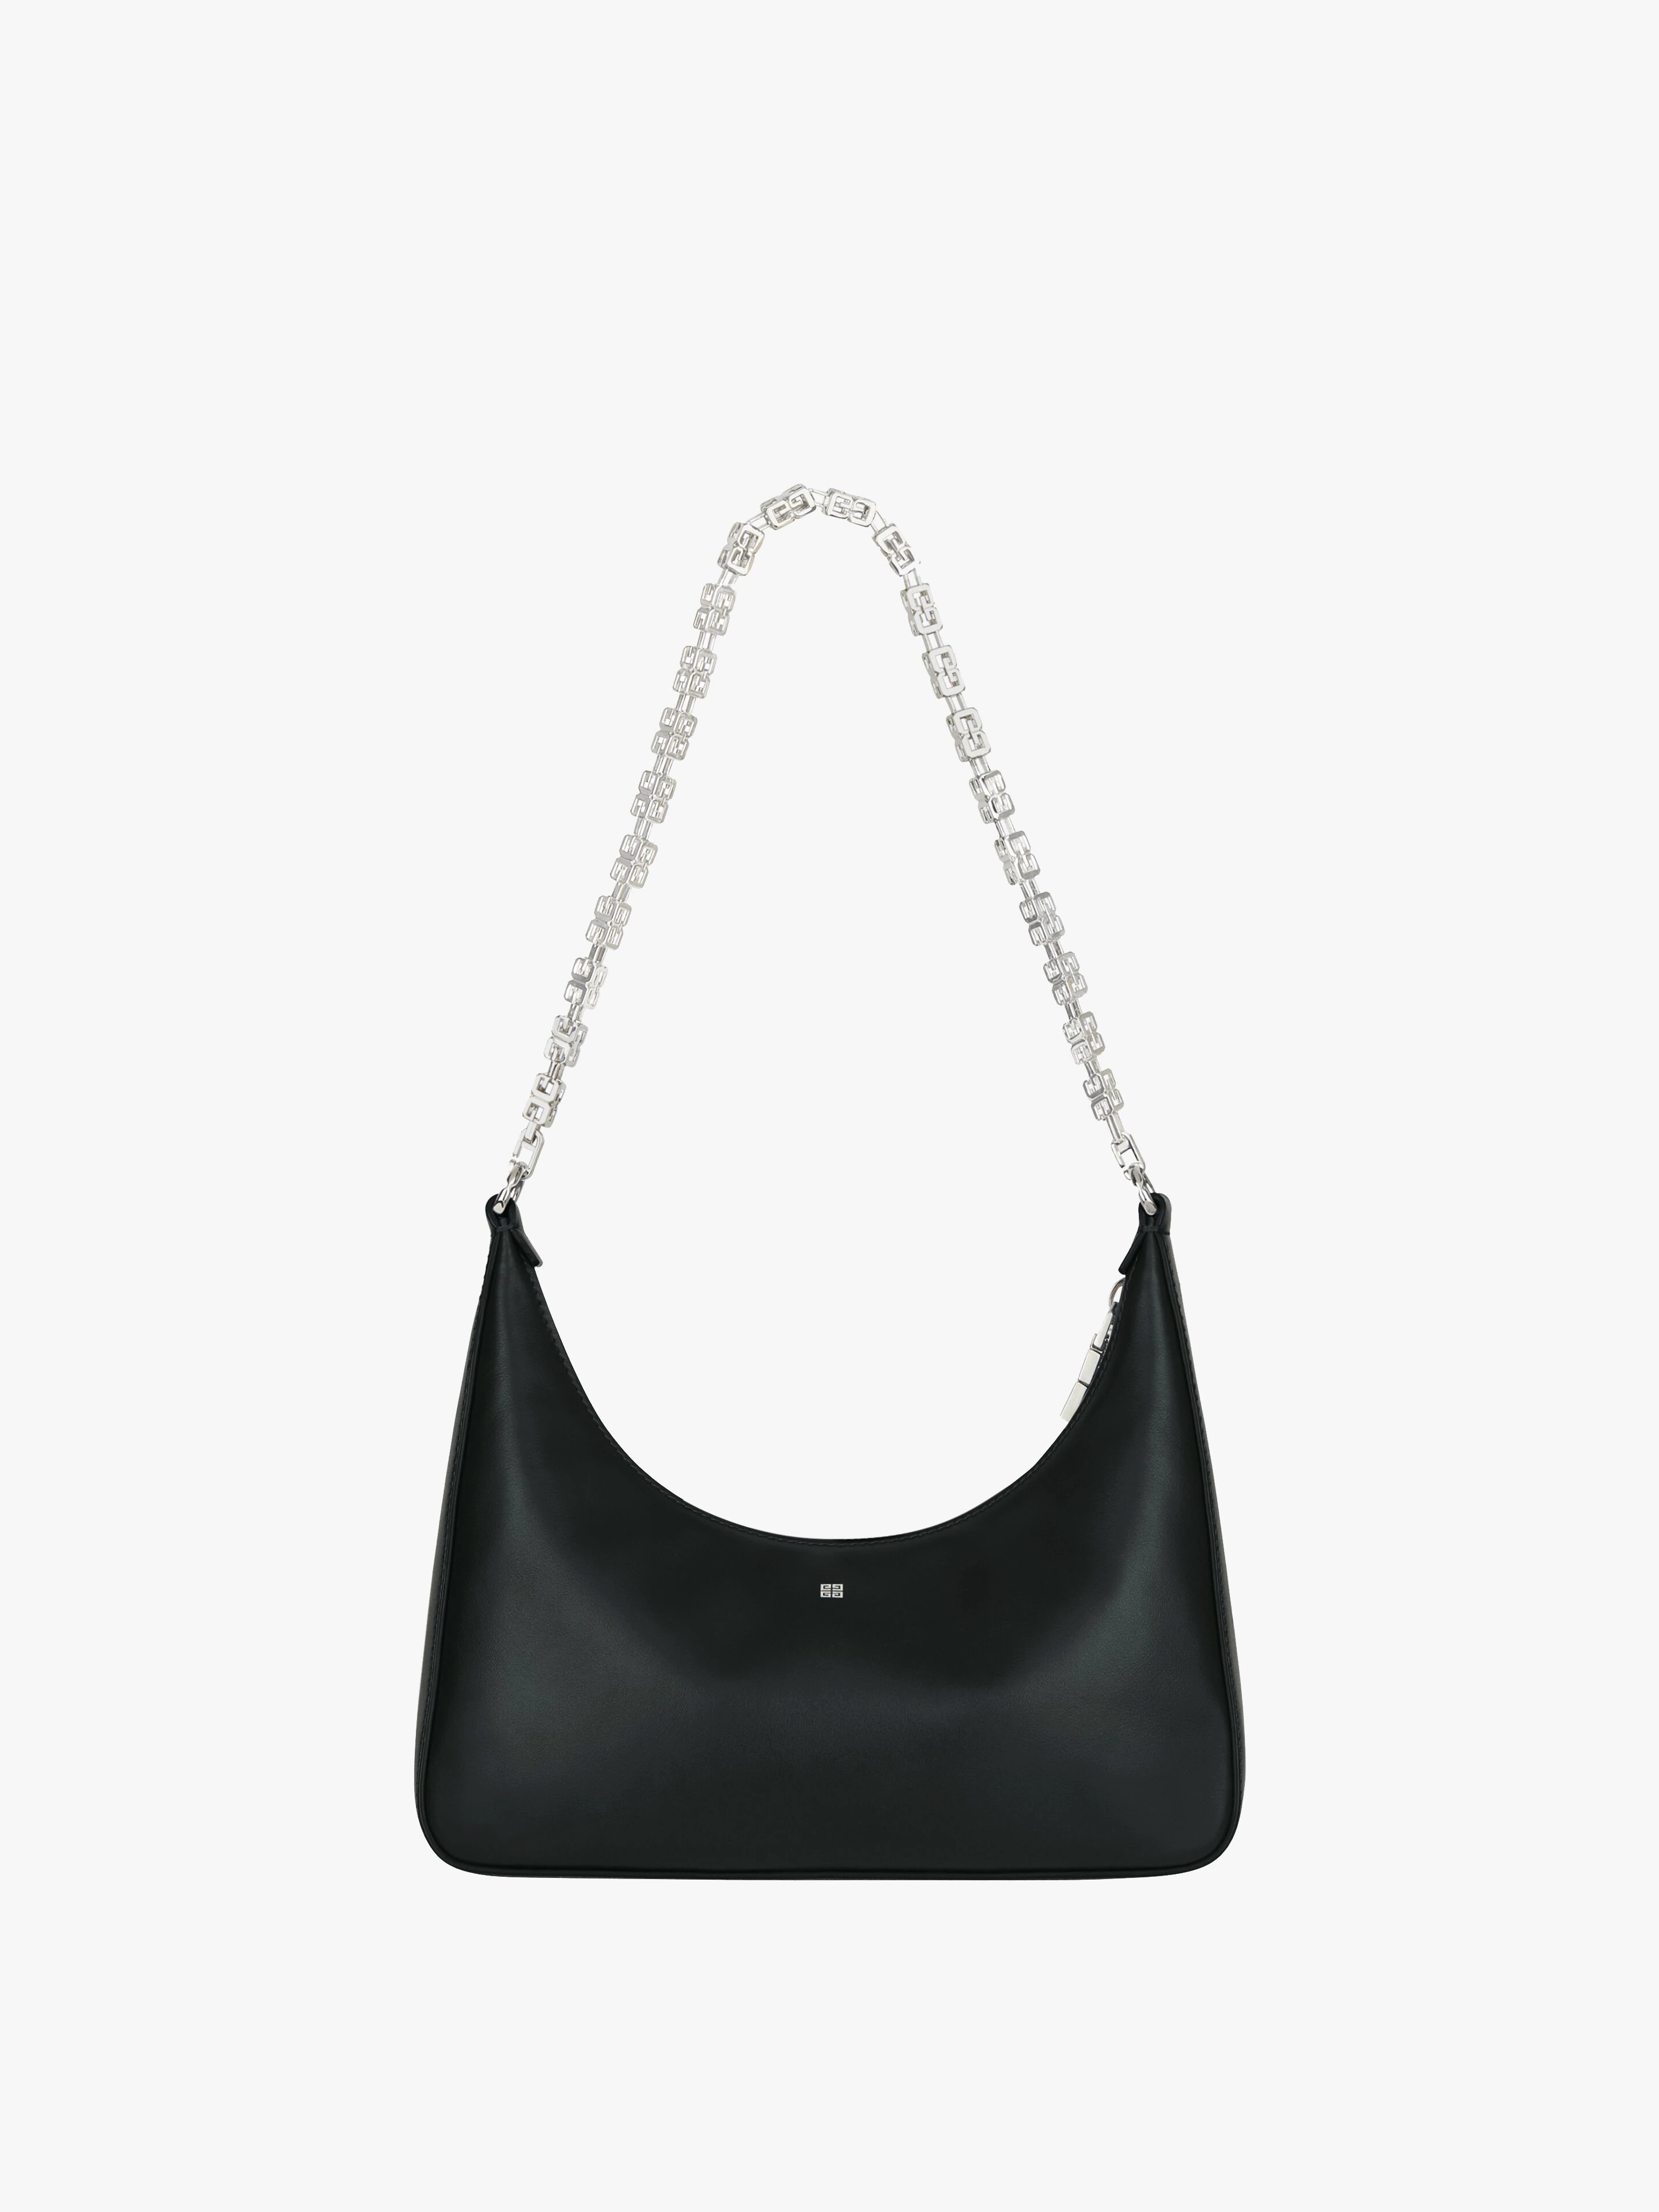 SMALL MOON CUT OUT BAG IN LEATHER WITH CHAIN - 5